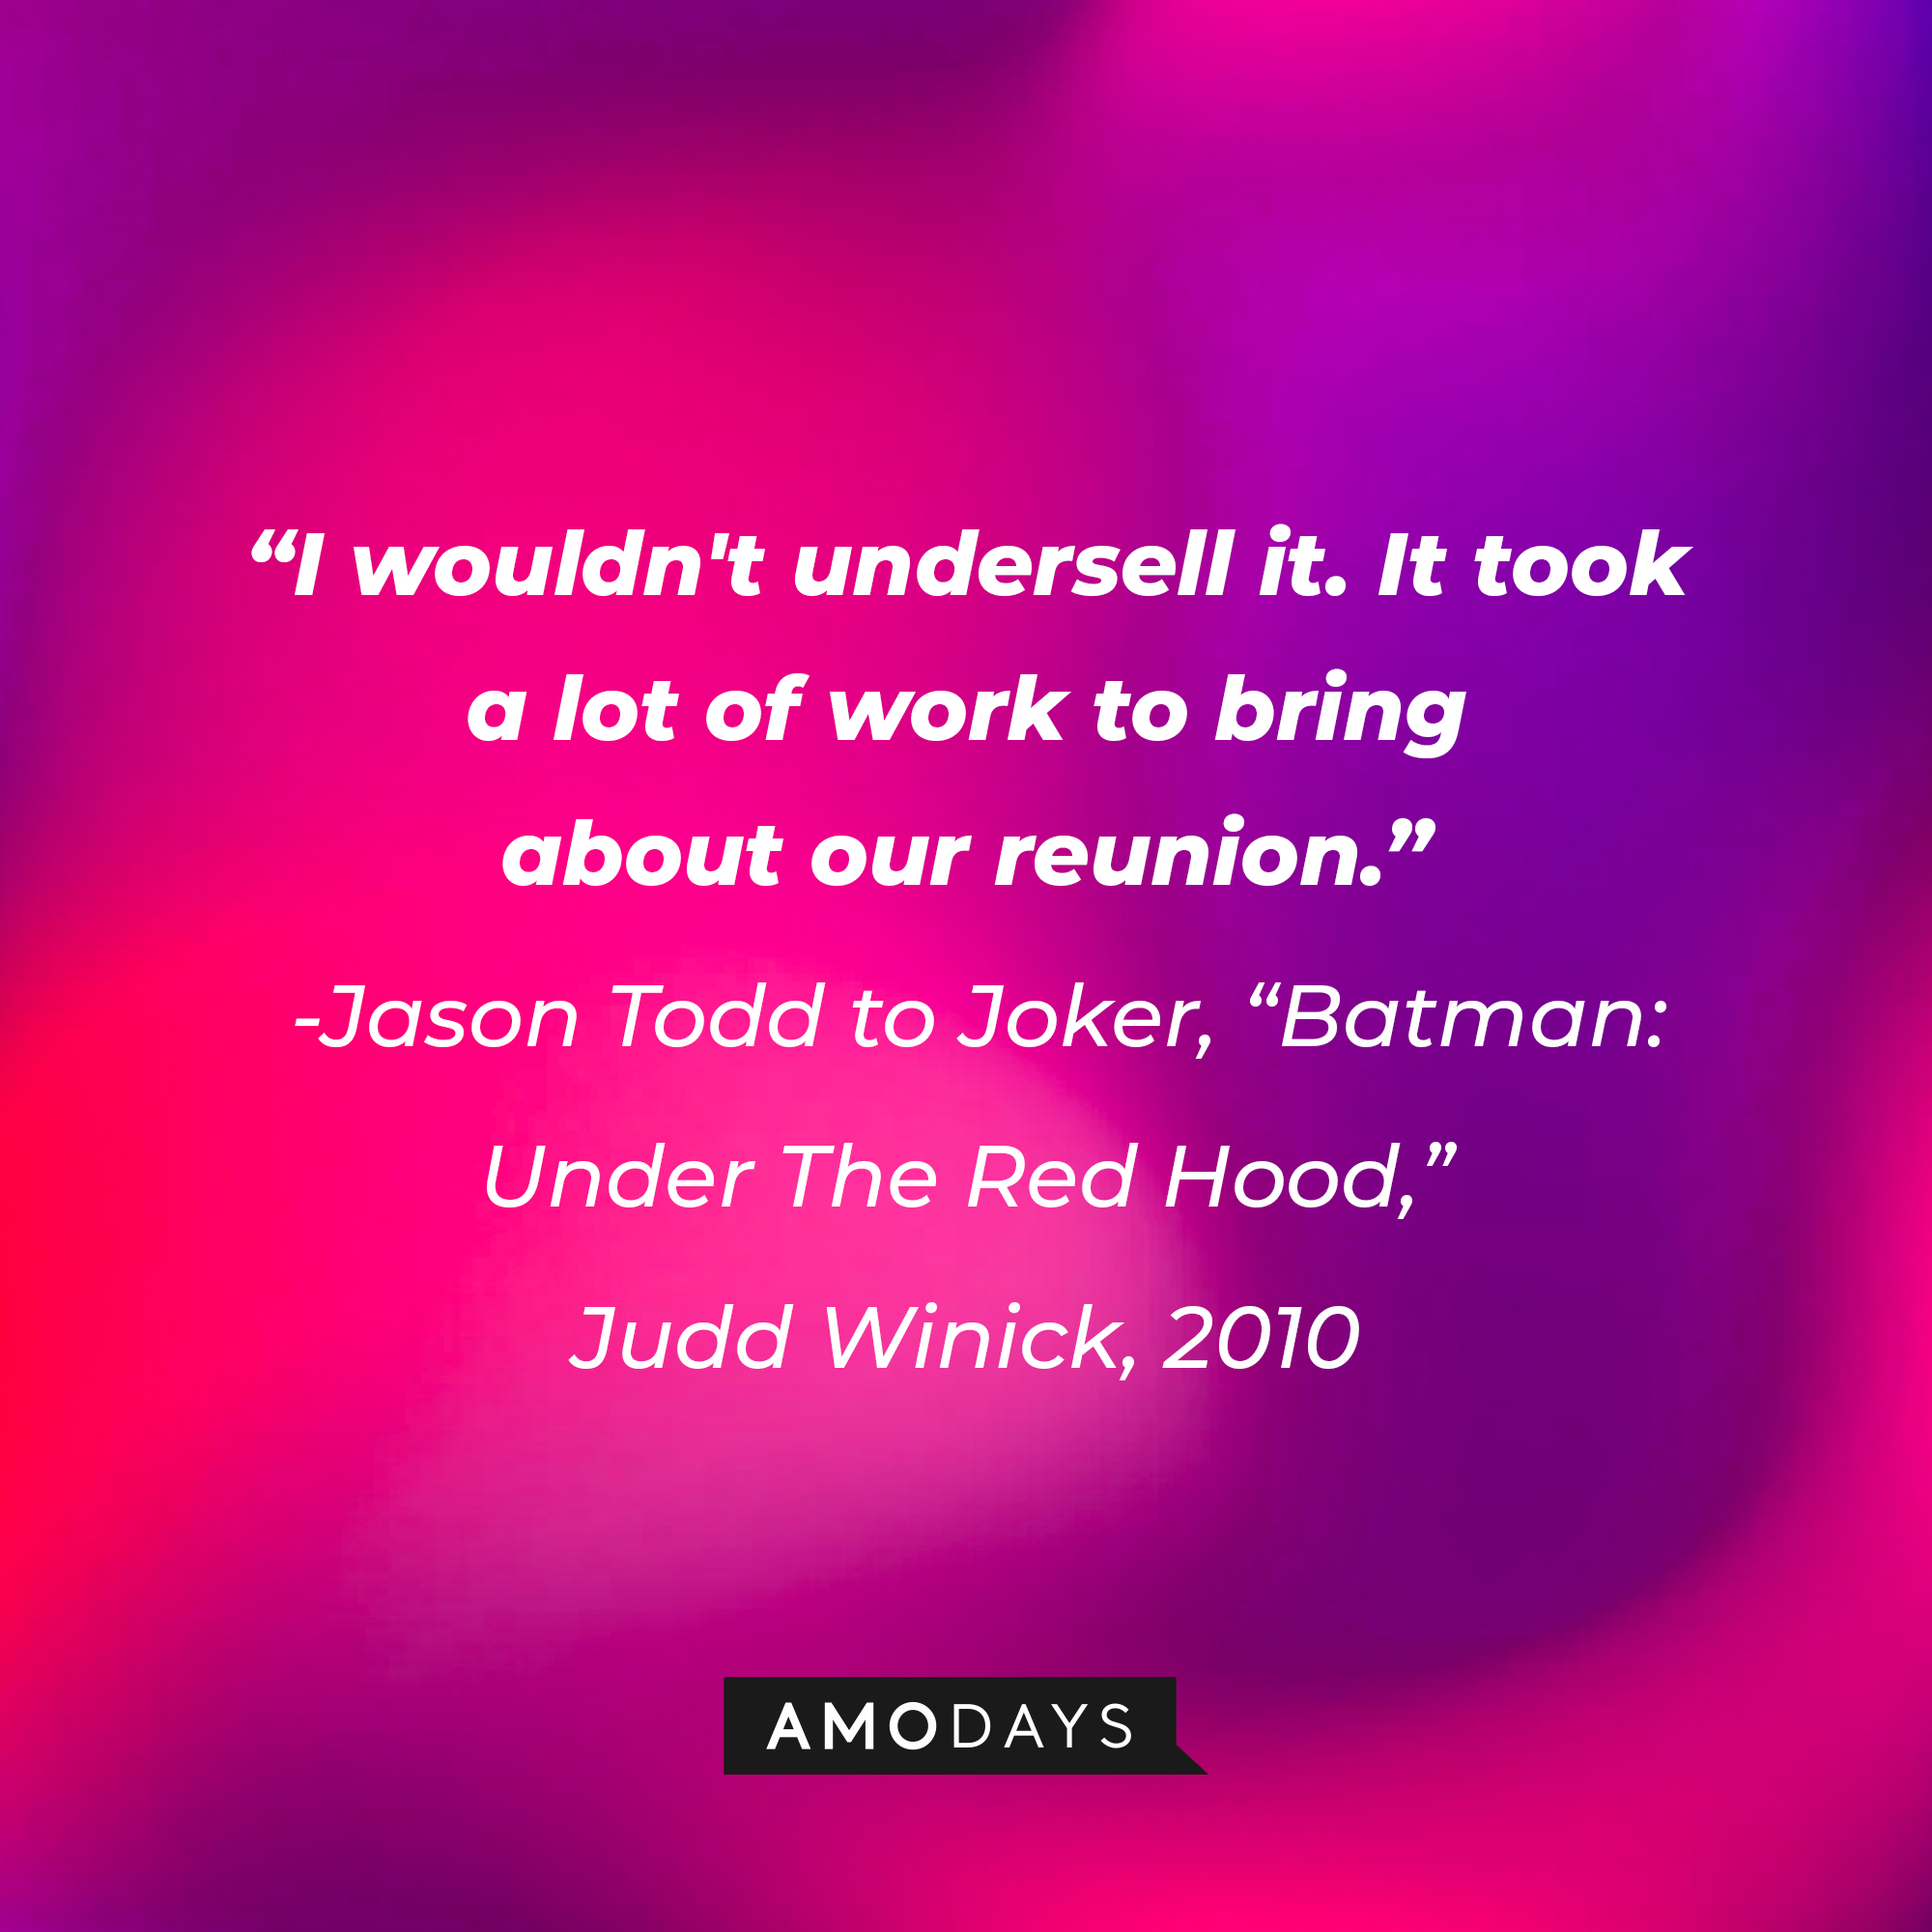 A quote from Jason Todd in "Batman: Under The Red Hood," Judd Winick, 2010: "I wouldn't undersell it. It took a lot of work to bring about our reunion." | Source: AmoDays